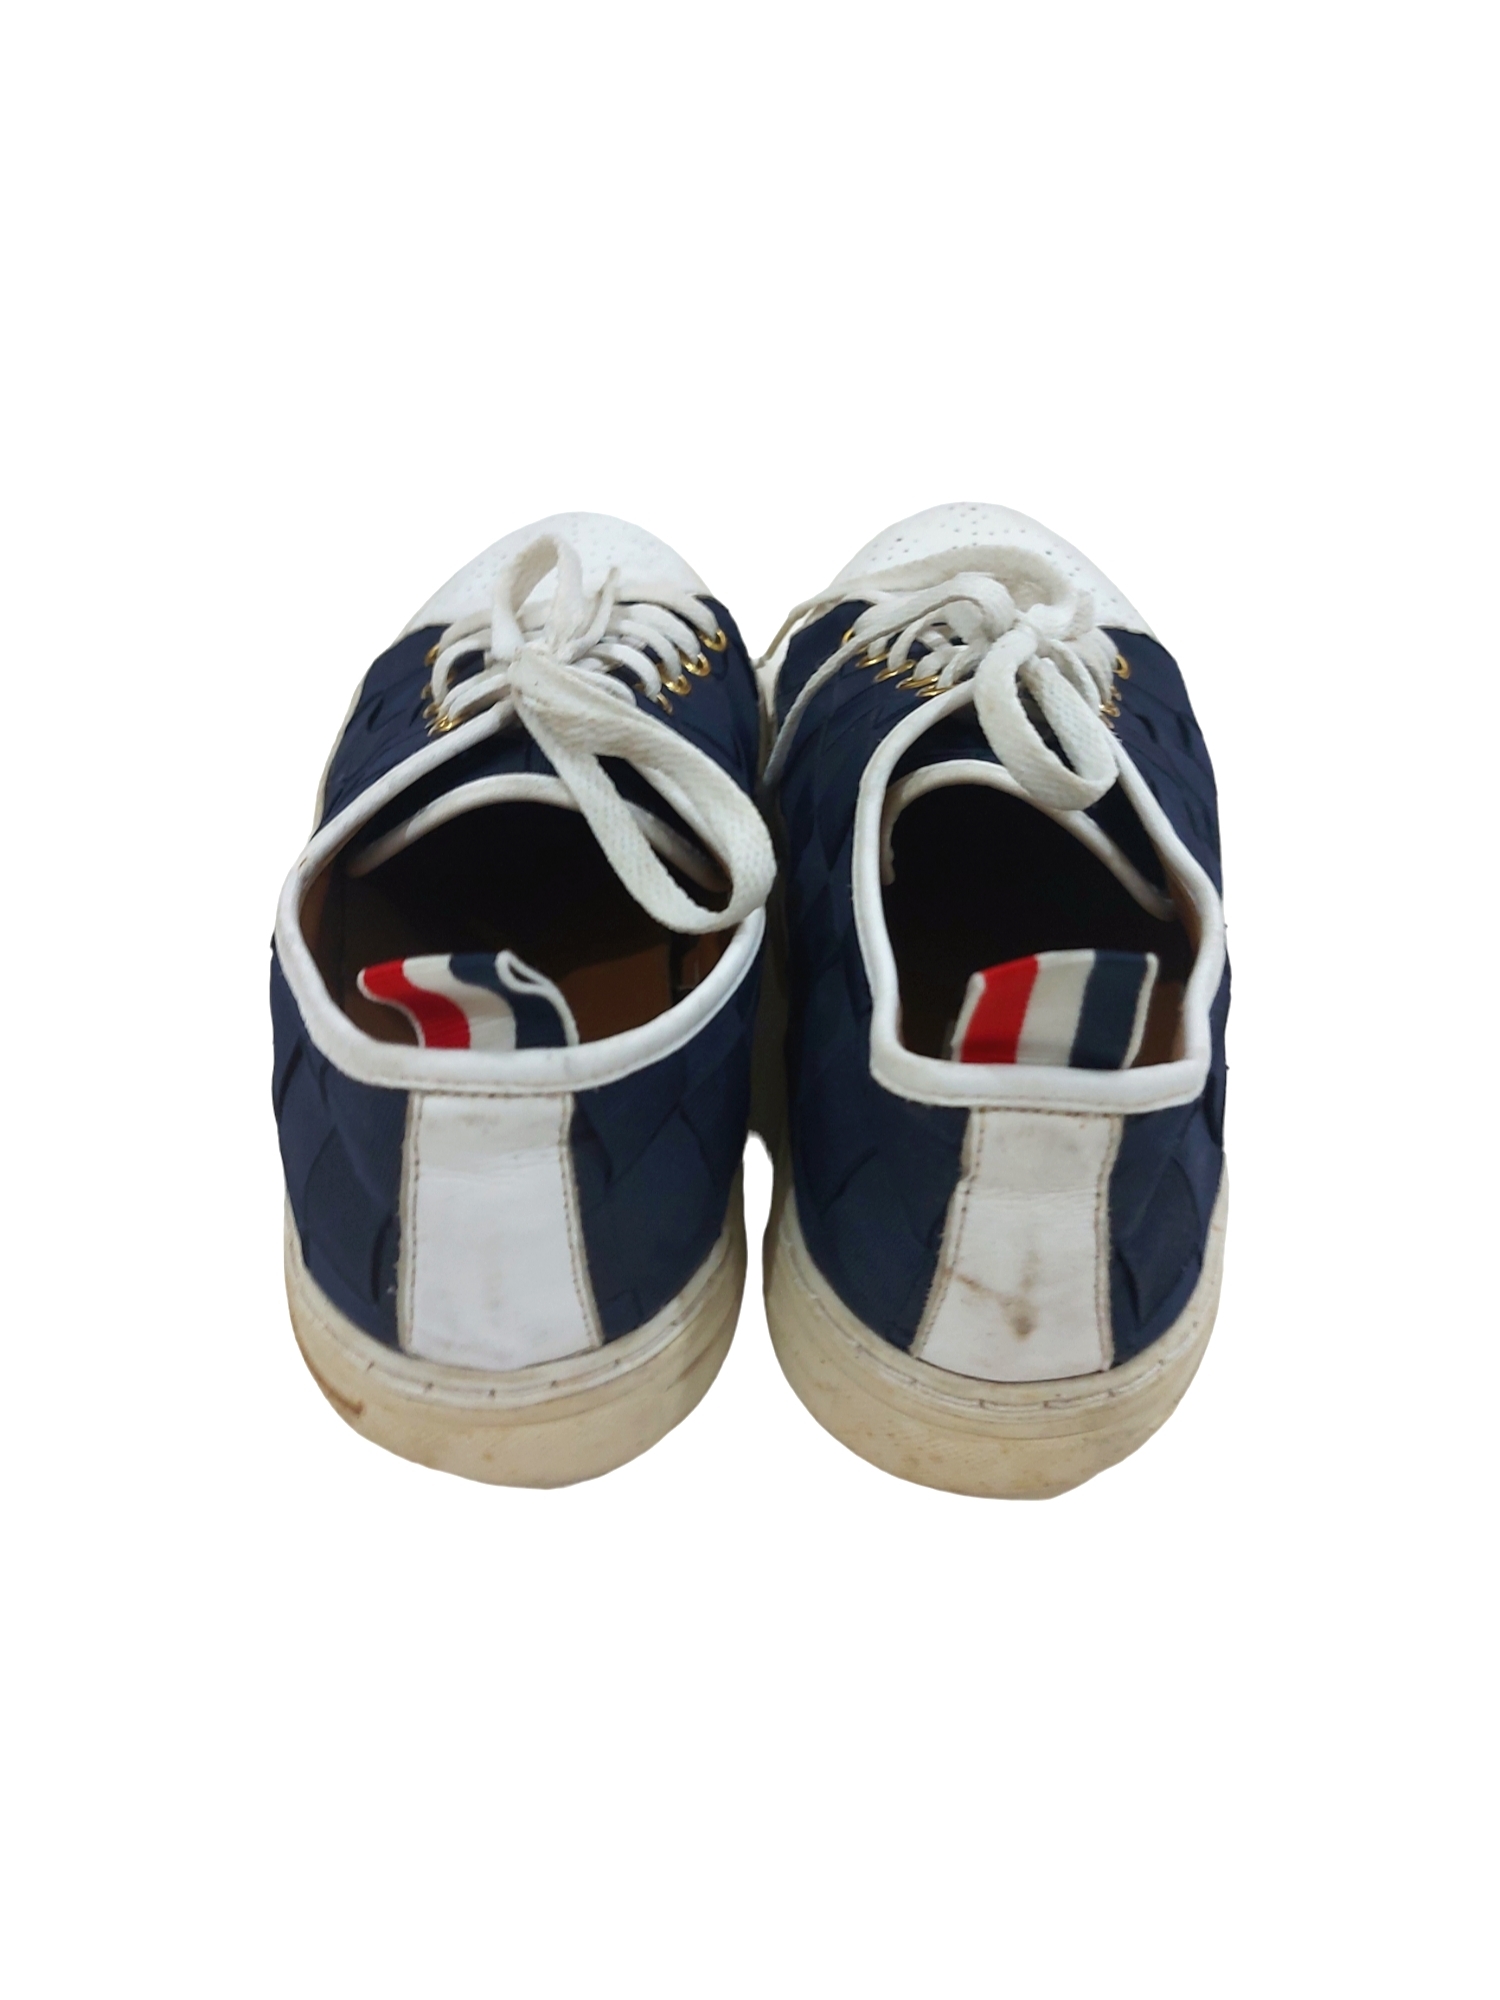 THOM BROWNE WOVEN NAVY SNEAKERS - 4